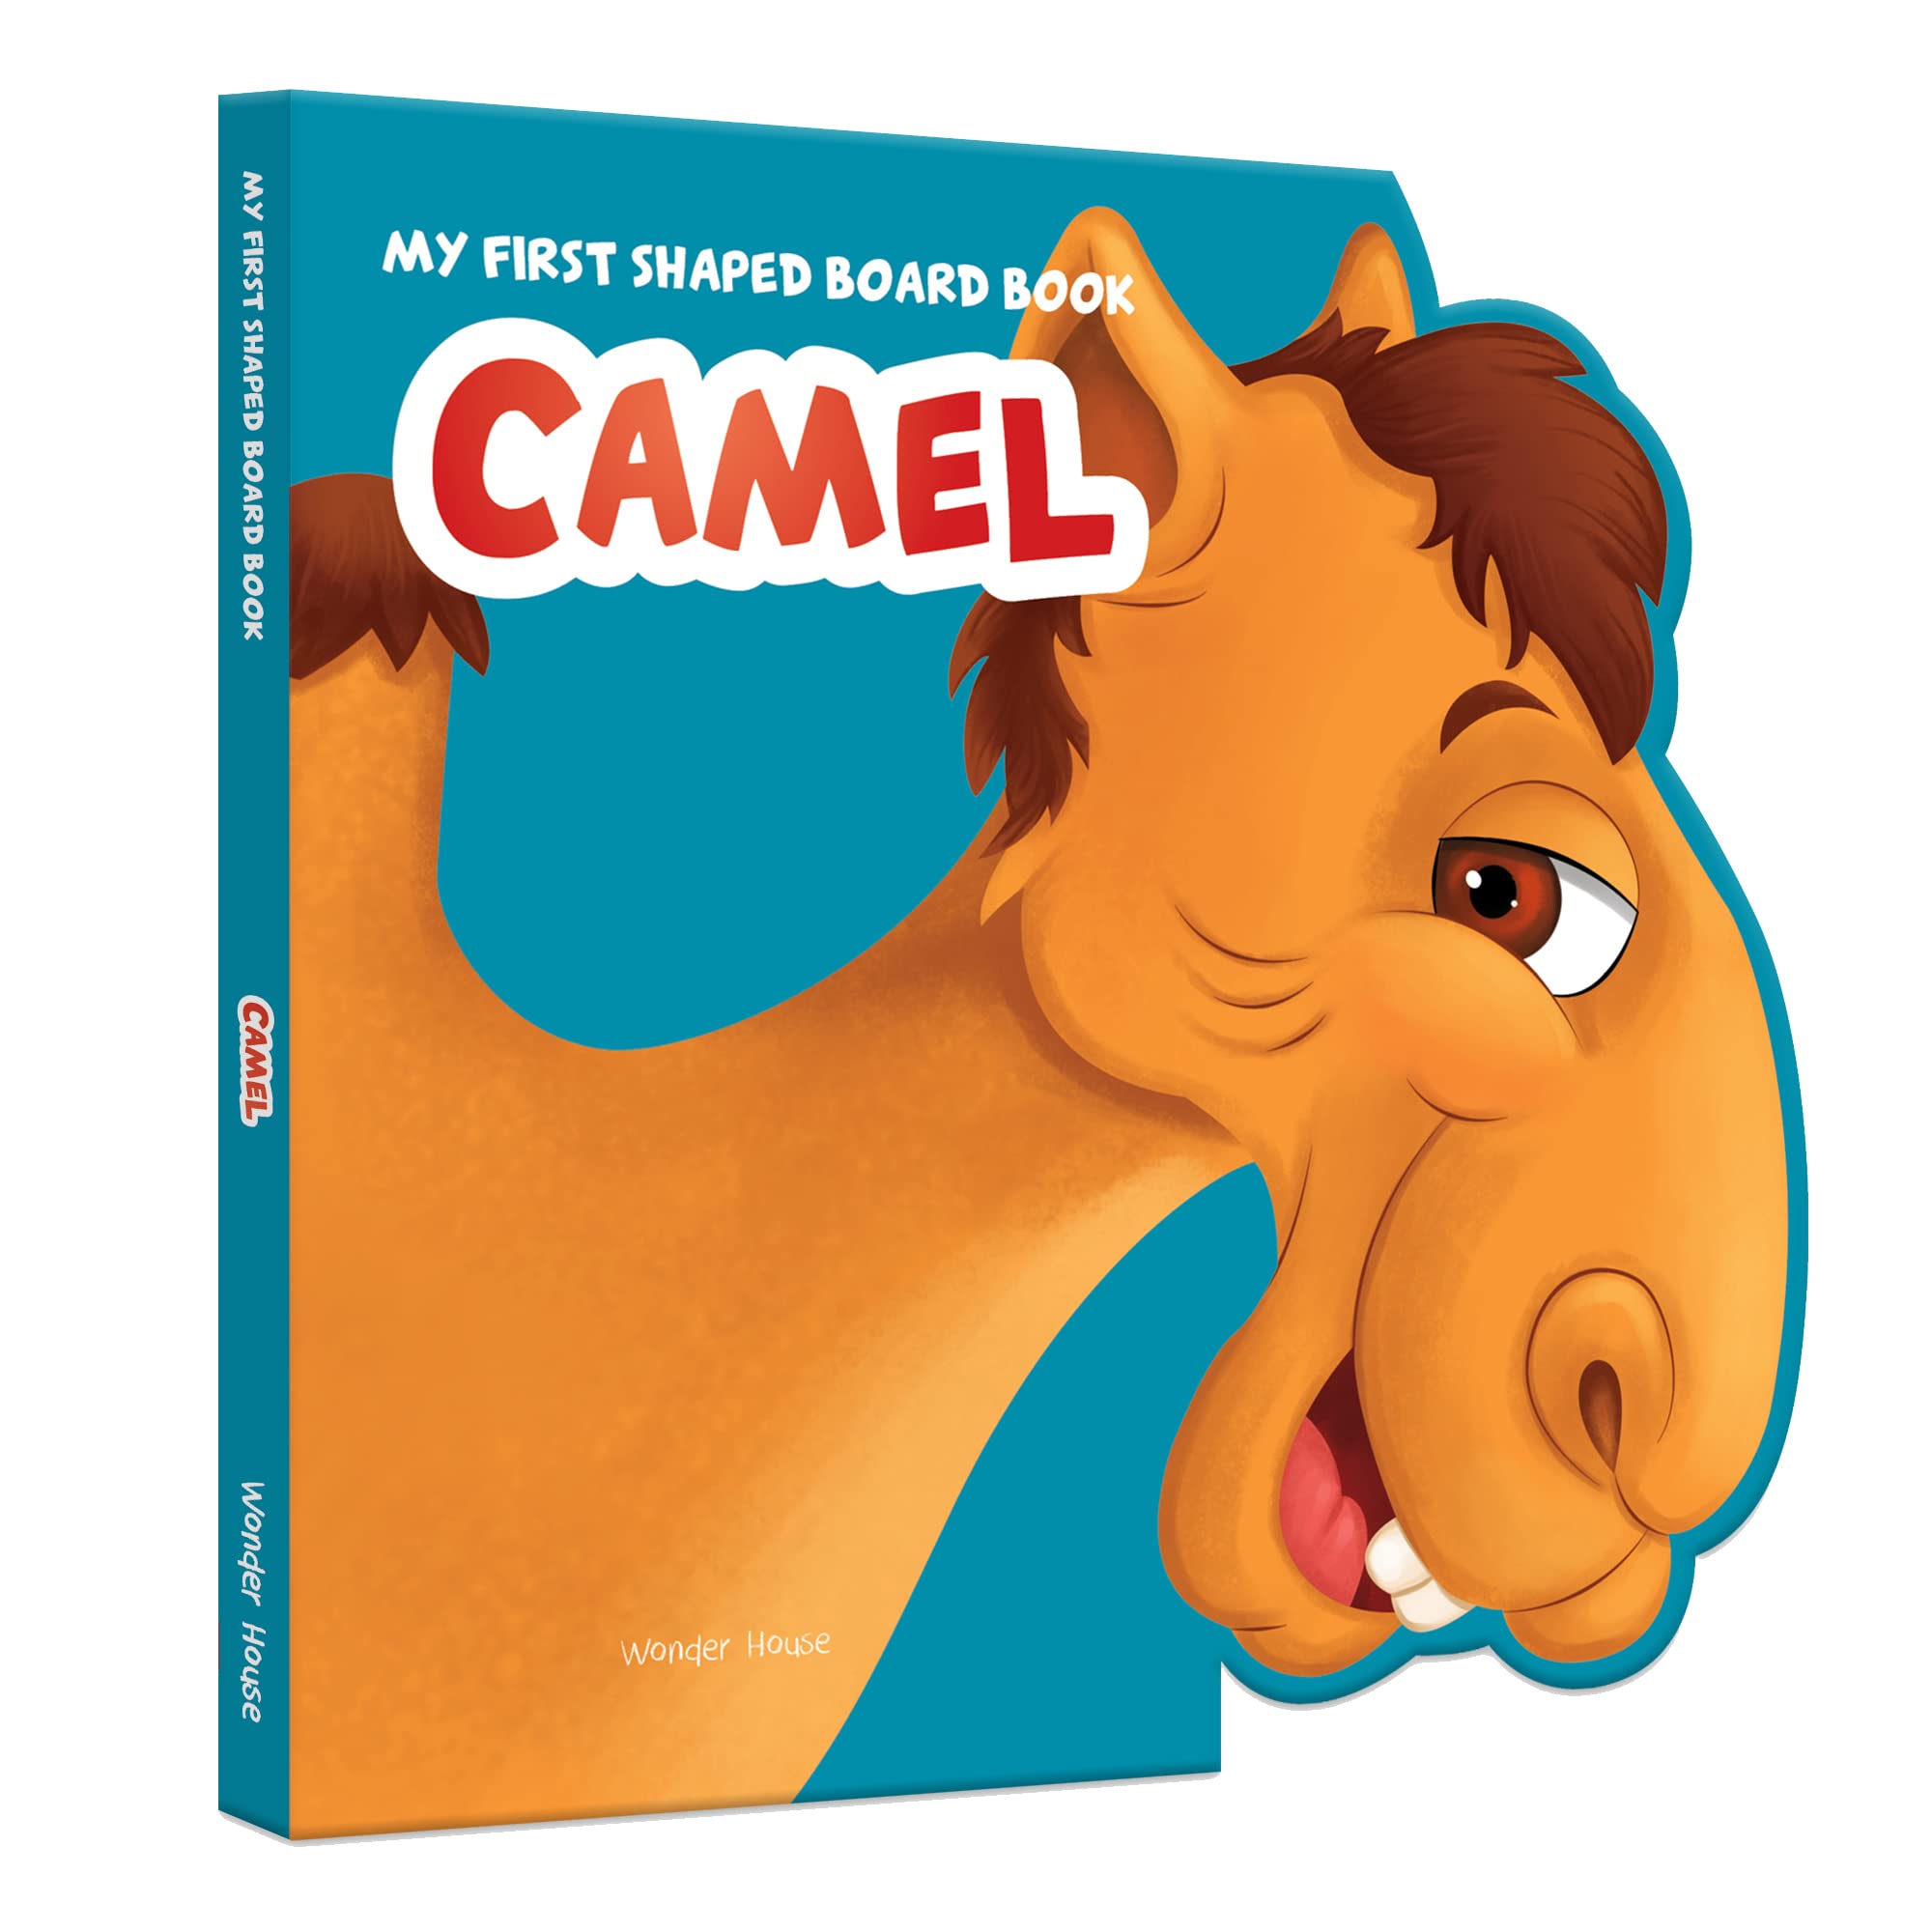 My First Shaped Board Book - Camel